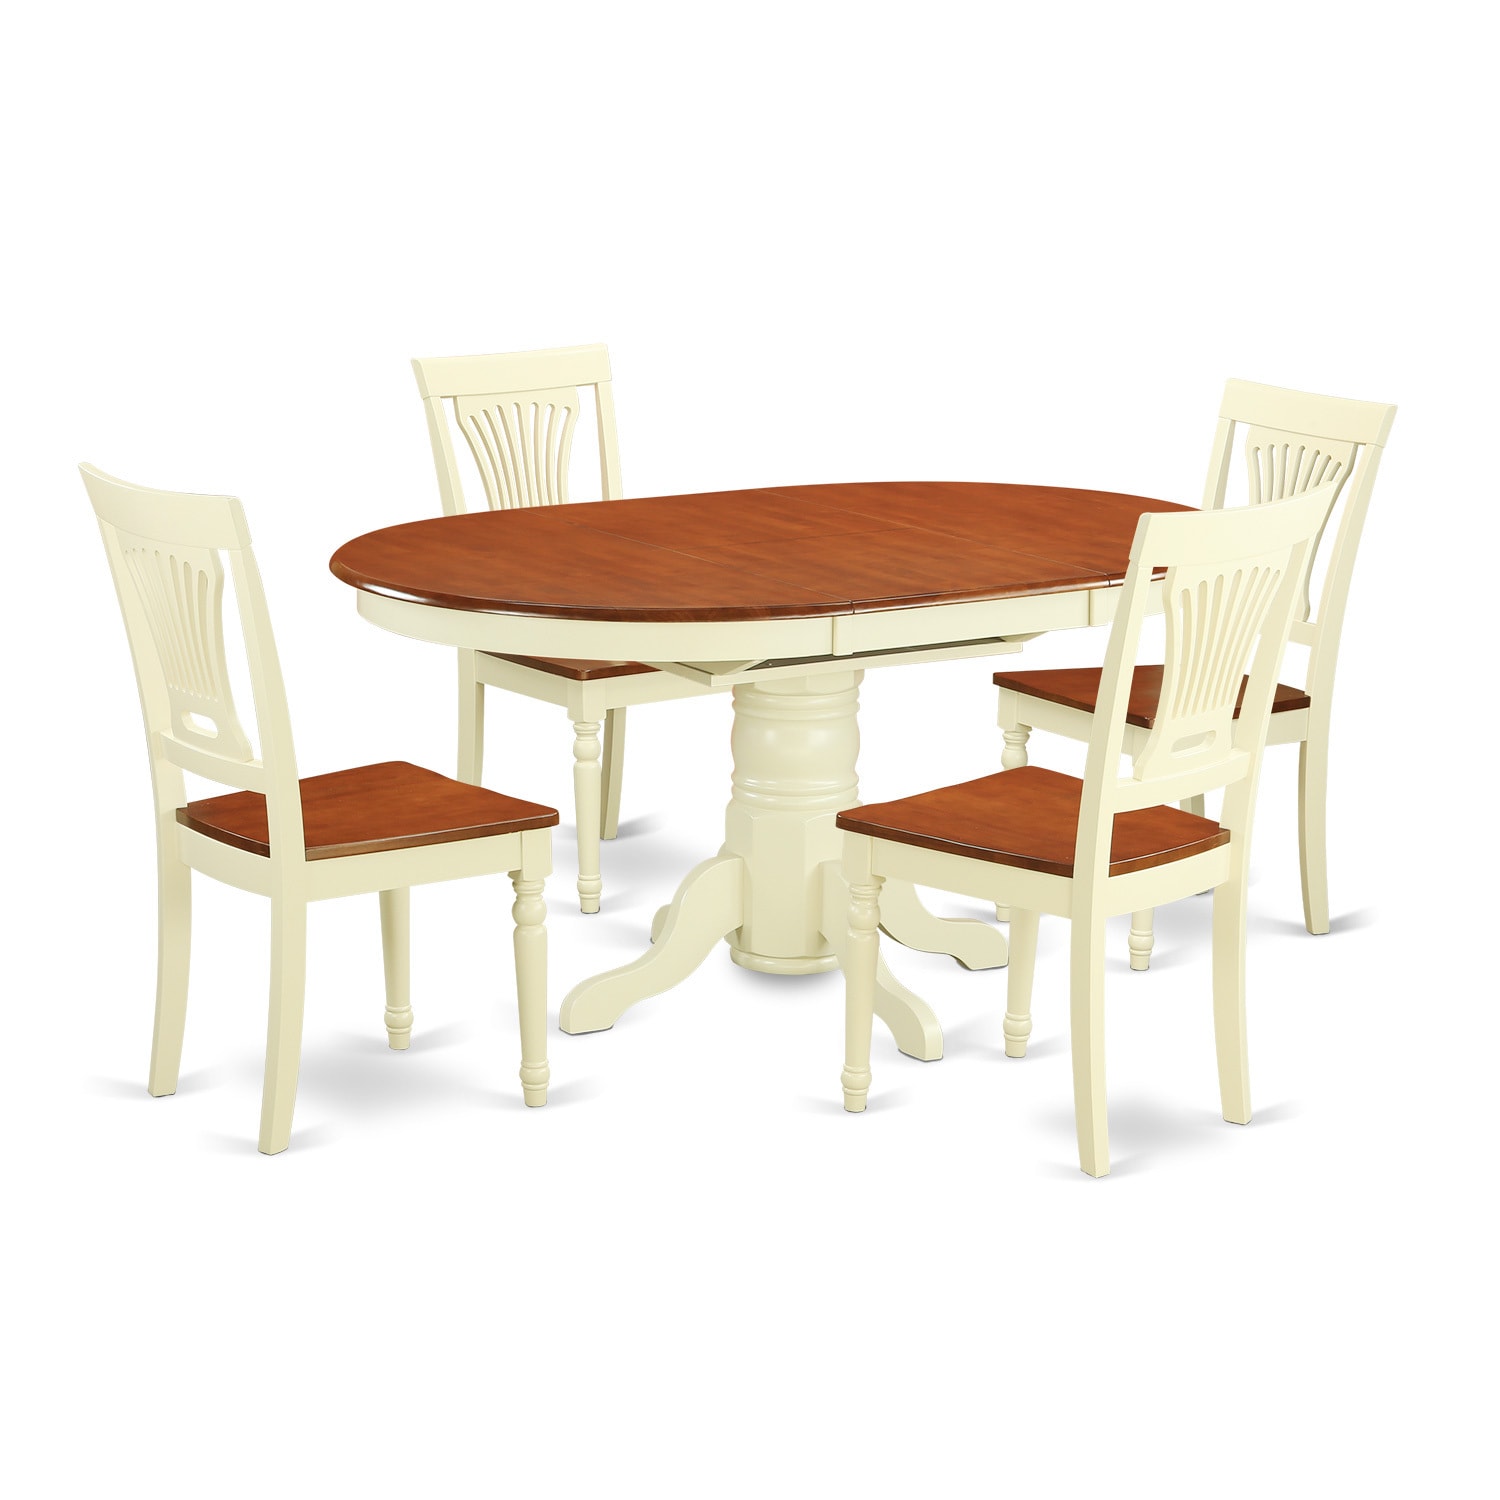 Shop Buttermilk And Cherry Finish Dining Table And Chairs Set